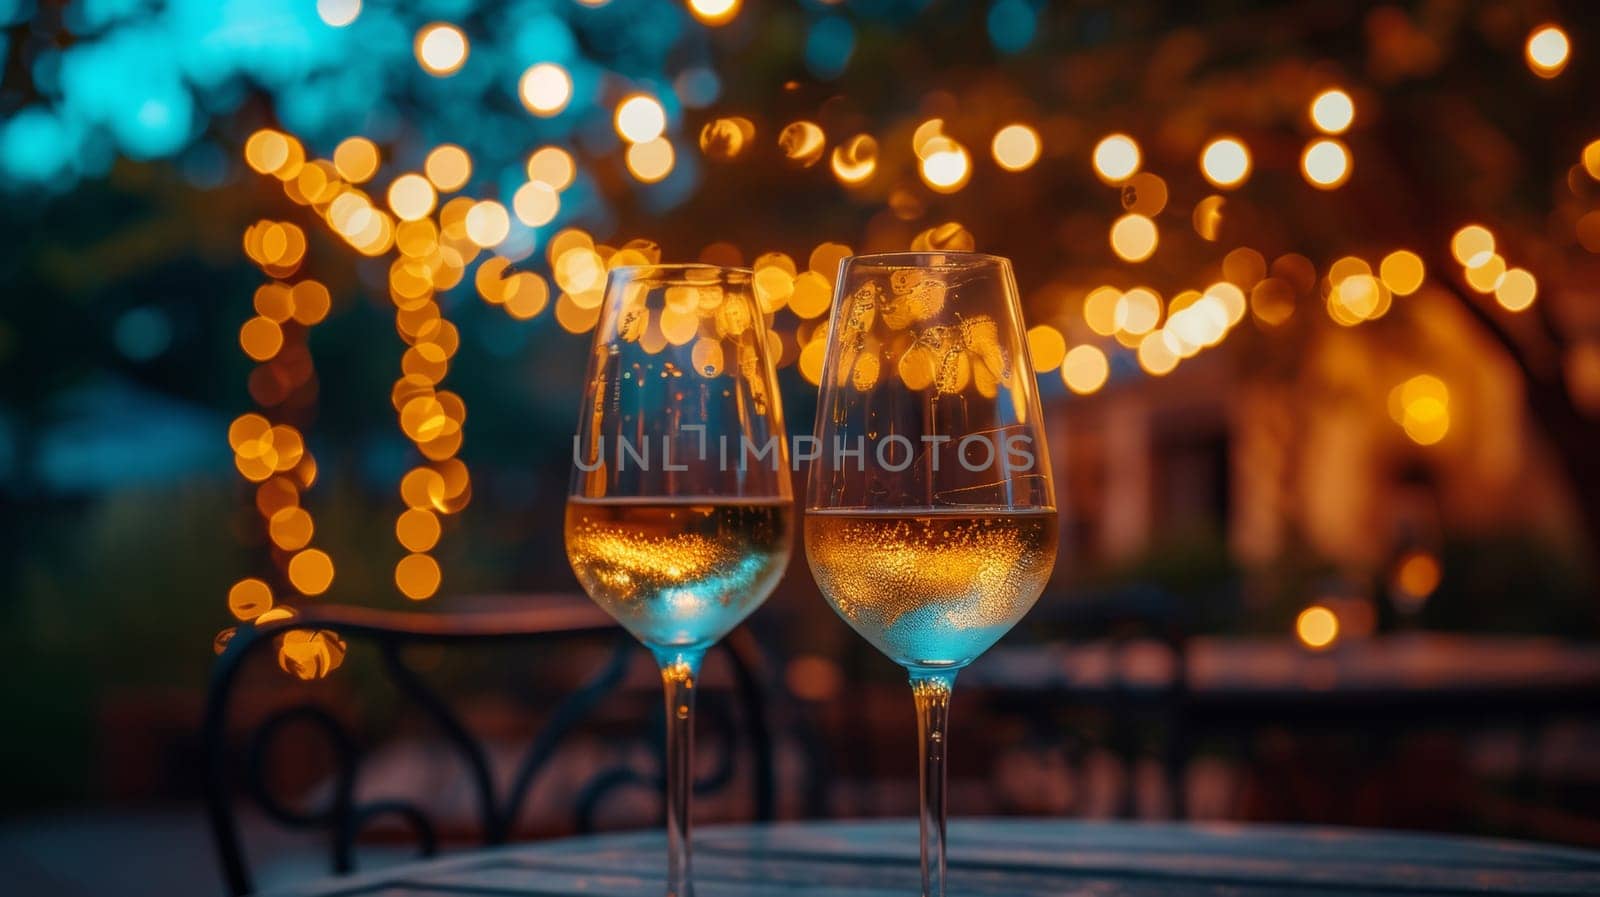 Two glasses of wine on a table with lights in the background